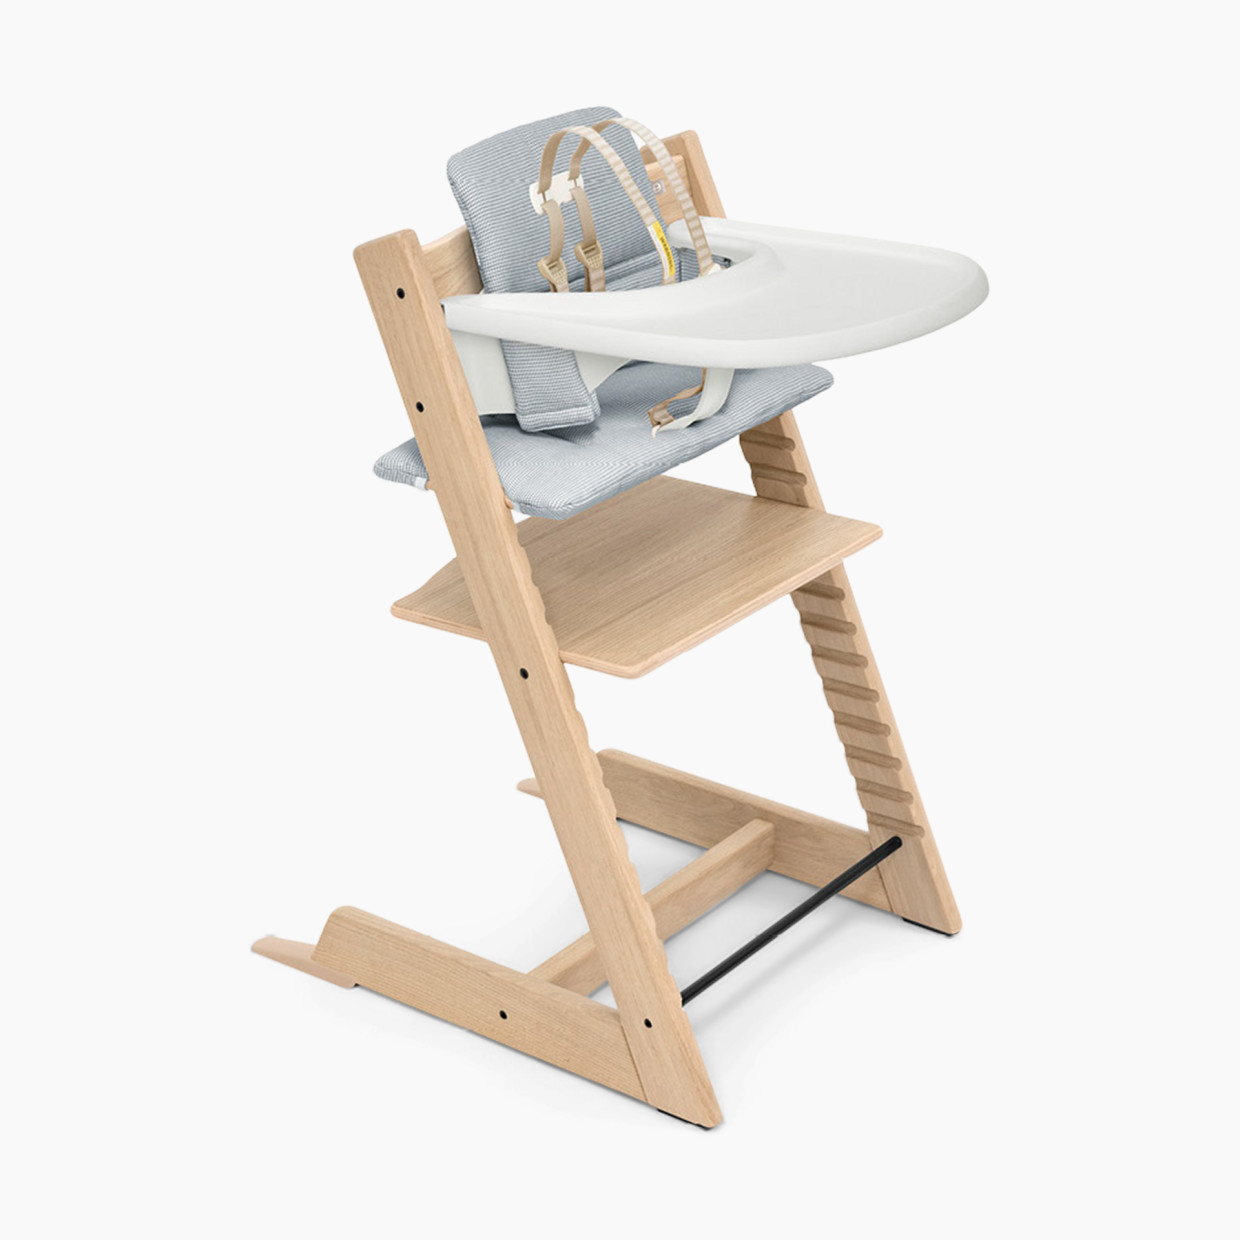 Stokke Tripp Trapp High Chair Complete - Oak Natural/Nordic Blue Cushion/White Tray.